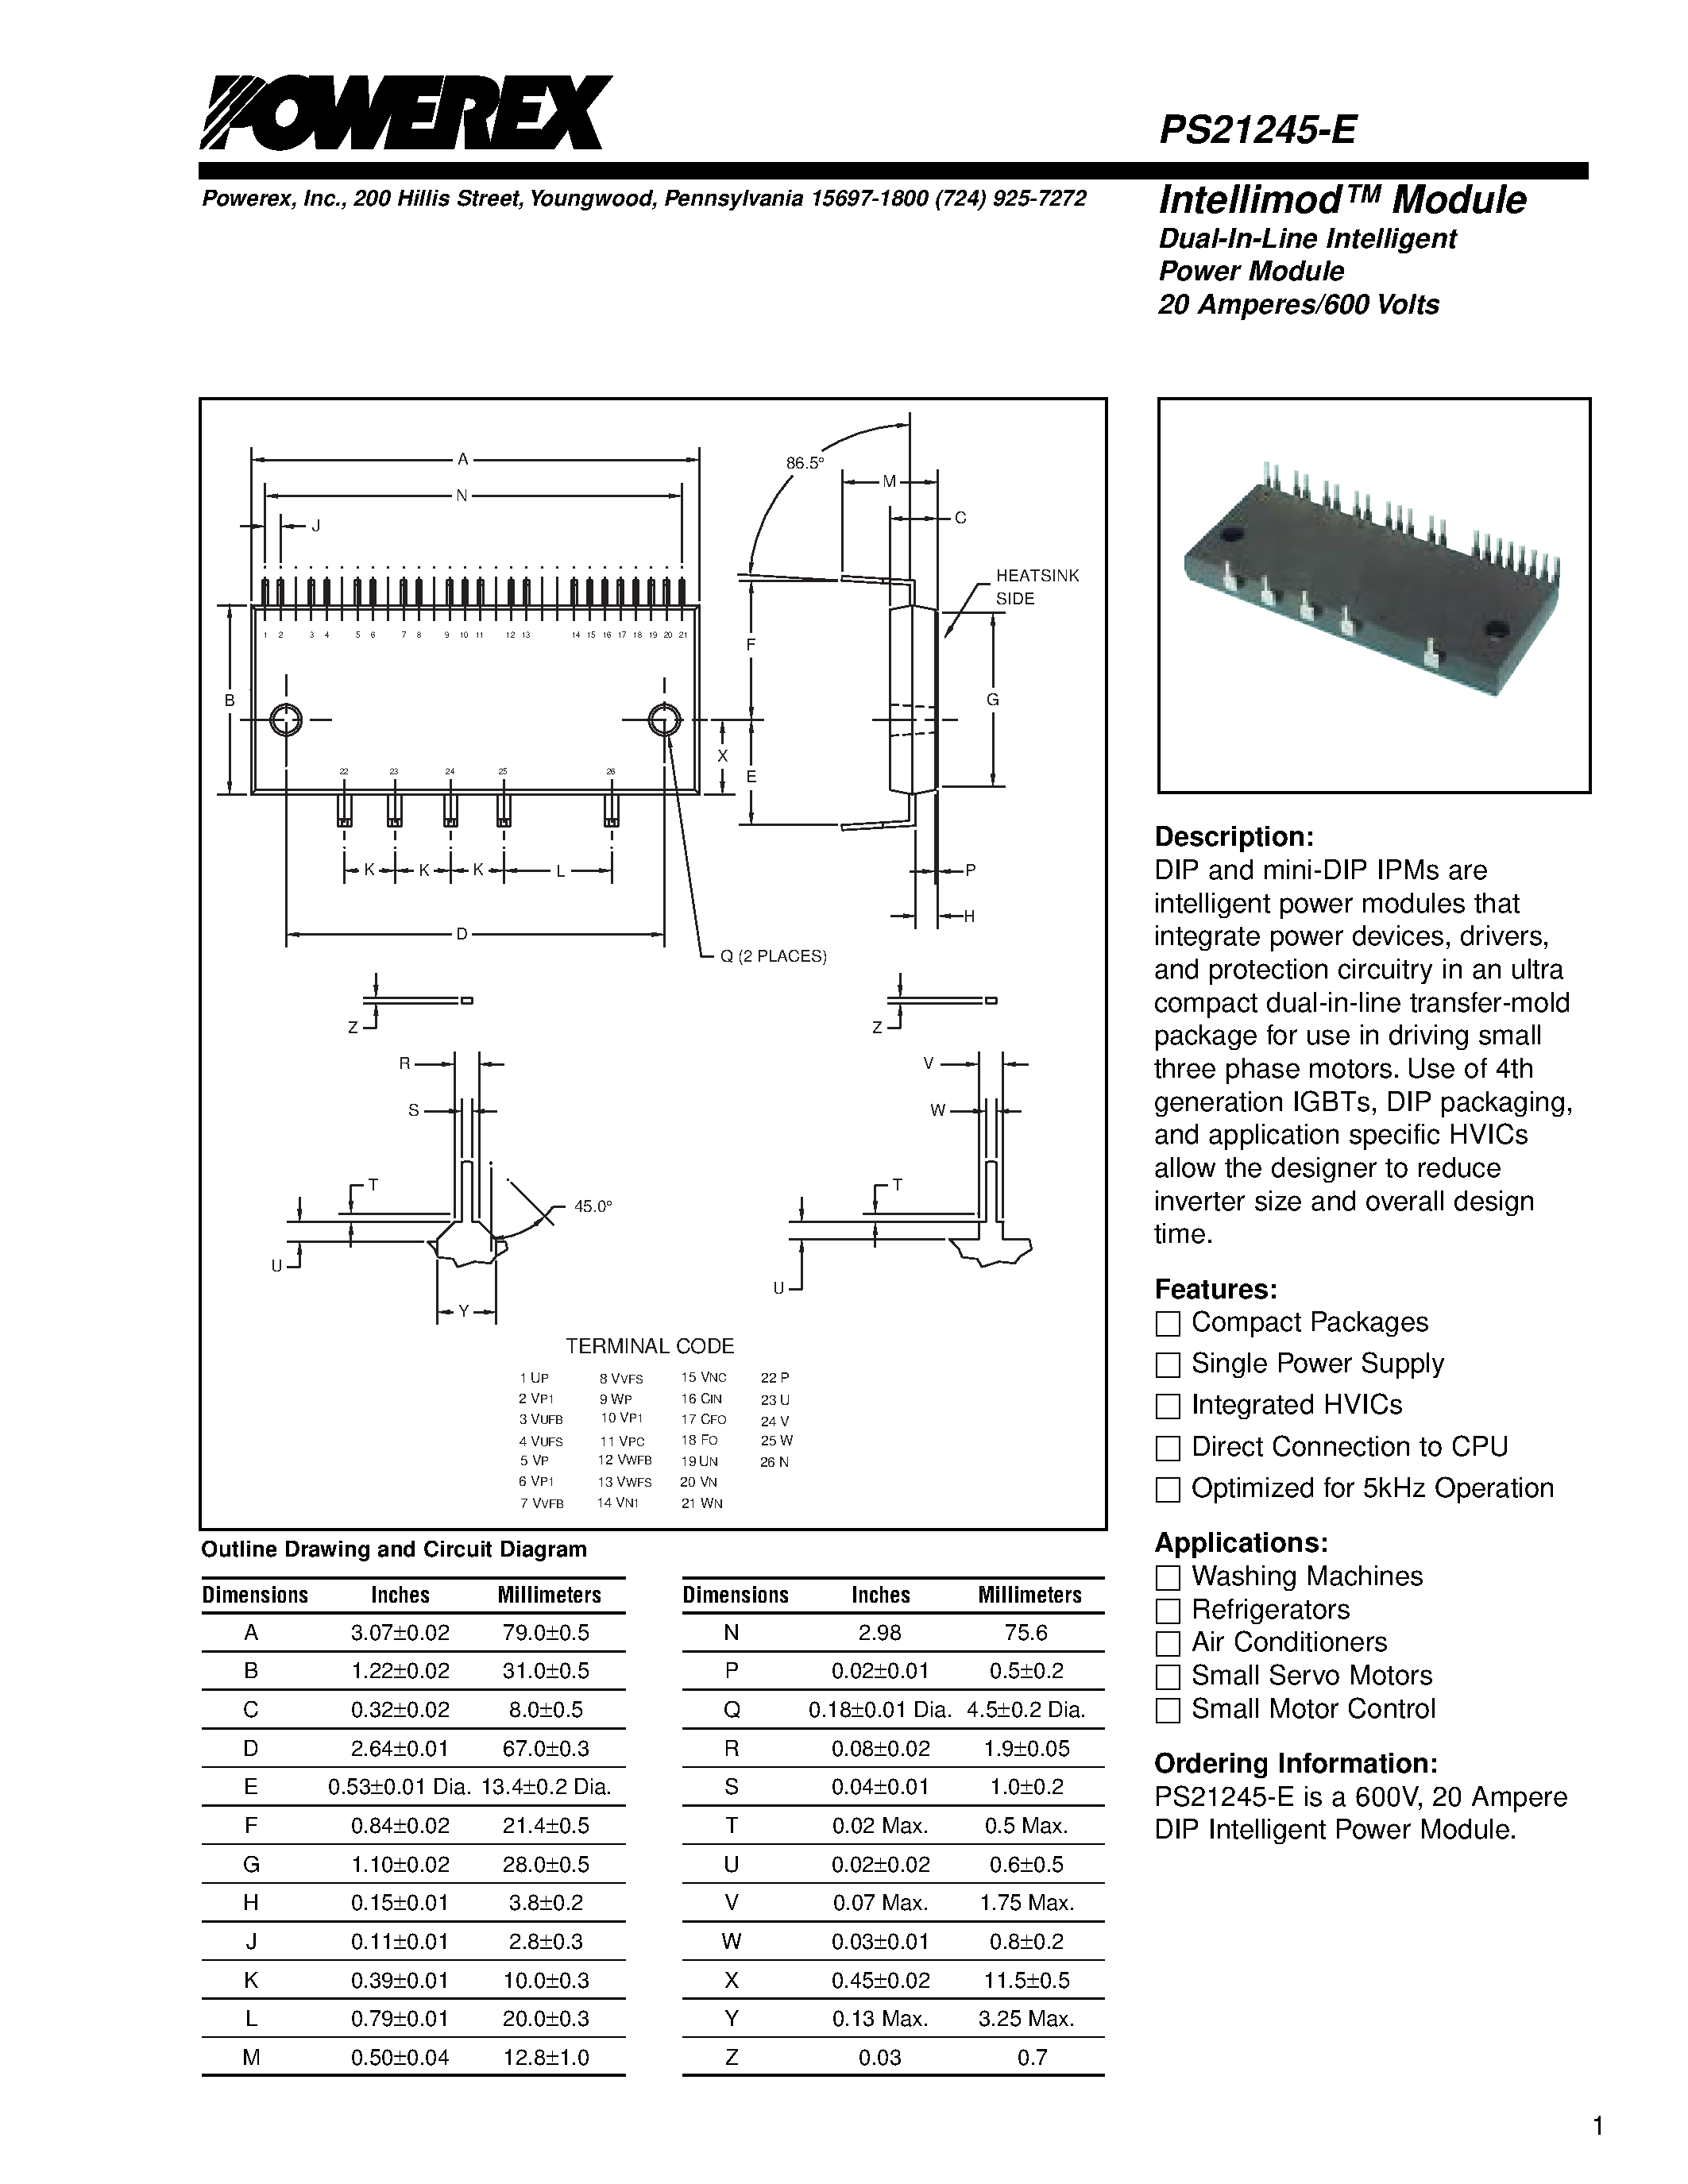 Datasheet PS21245-E - Intellimod Module Dual-In-Line Intelligent Power Module (20 Amperes/600 Volts) page 1